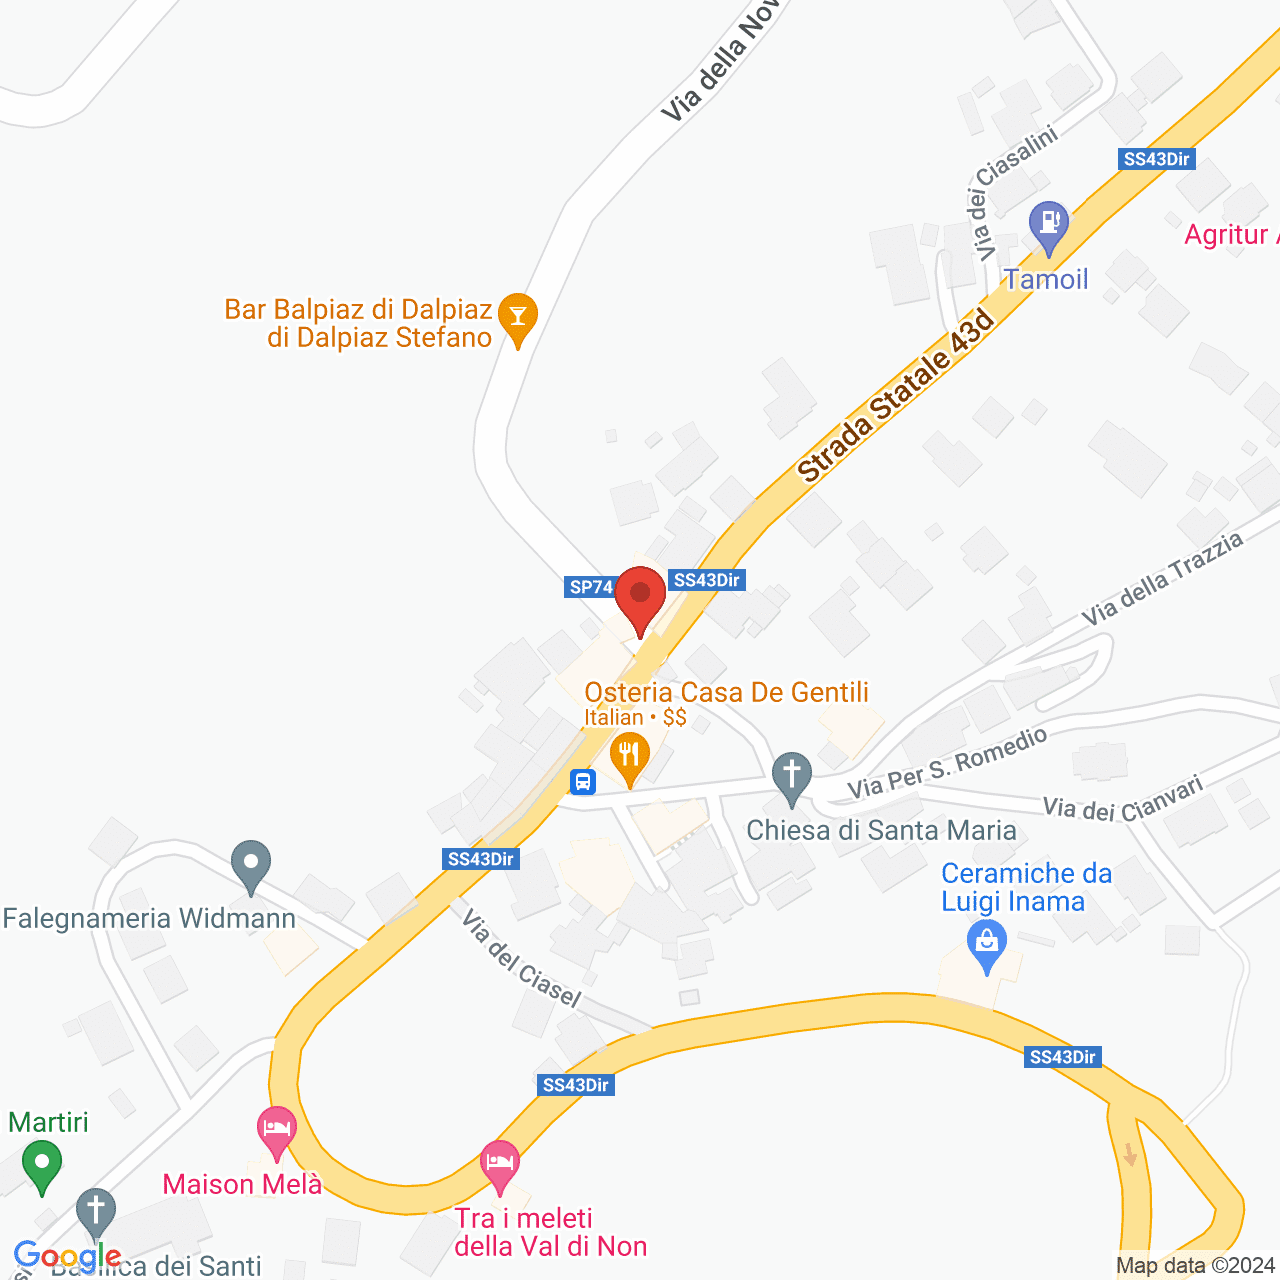 https://maps.googleapis.com/maps/api/staticmap?zoom=10&maptype=hybrid&scale=4&center=46.3661909,11.0745772&markers=color:red%7C%7C46.3661909,11.0745772&size=1000x1000&key=AIzaSyAQg6Liu52-a7wn17F9B-5c4QmJ9kTO3Mo